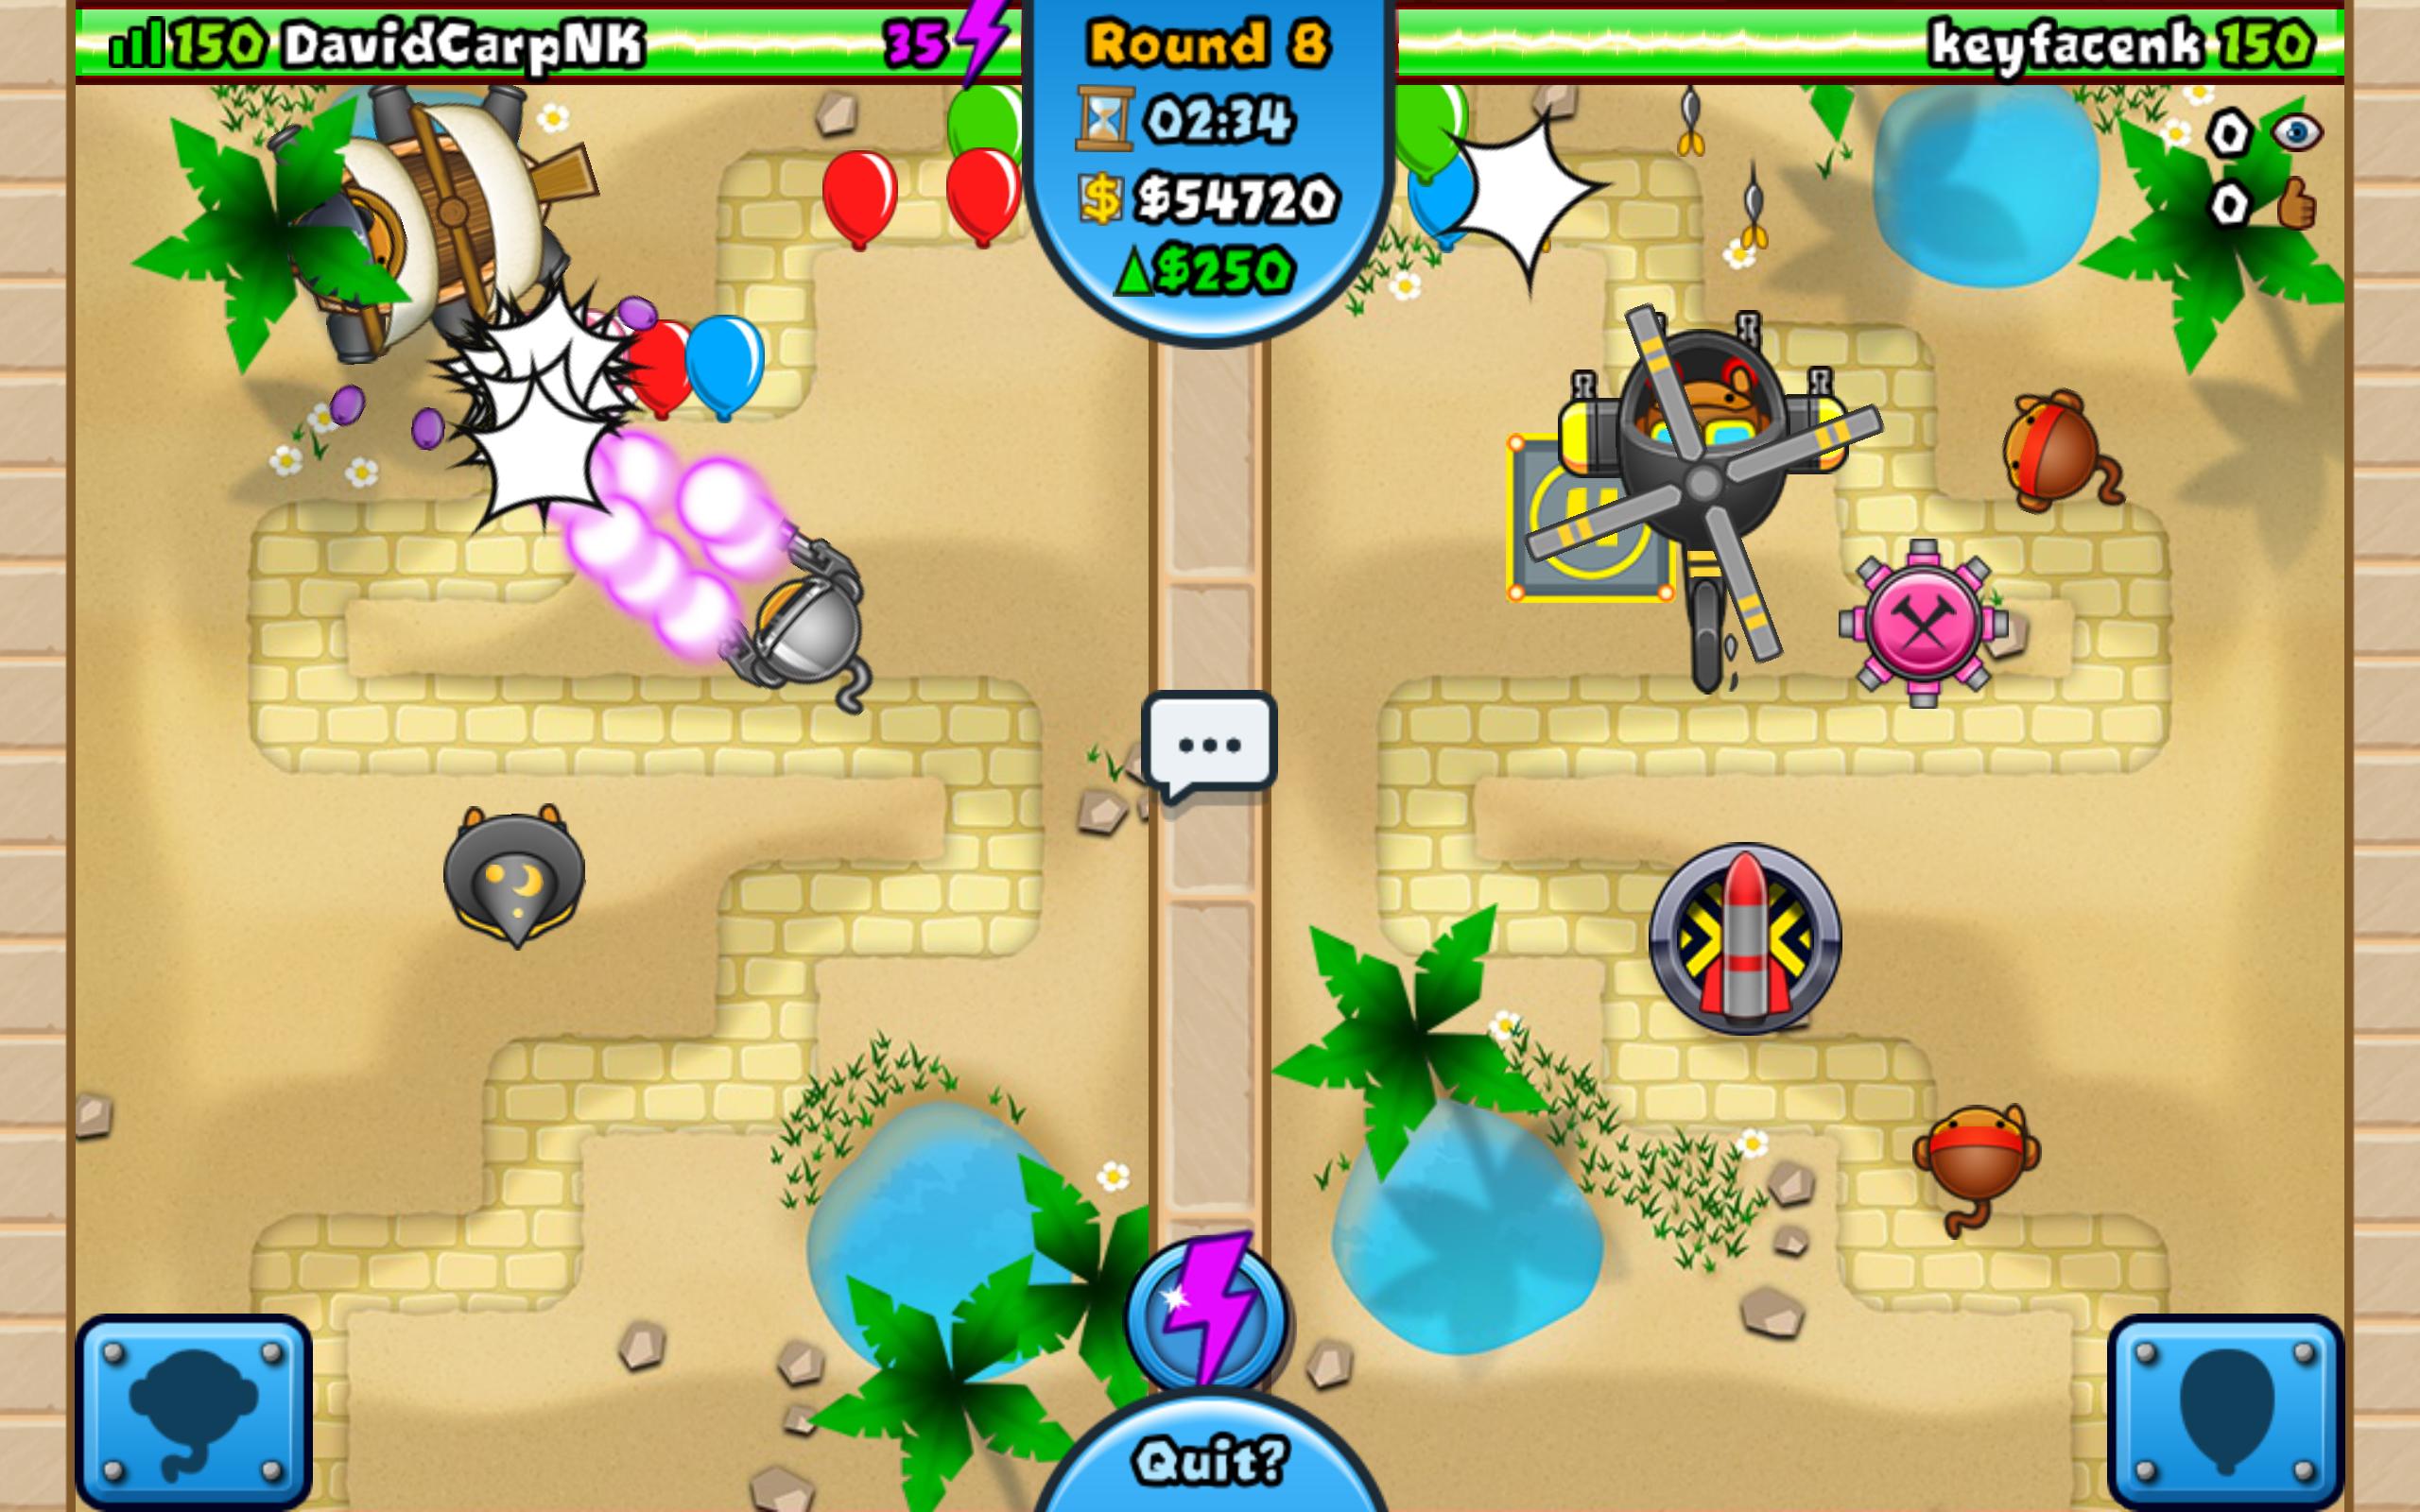 Bloons Td 4 Free Download Pc